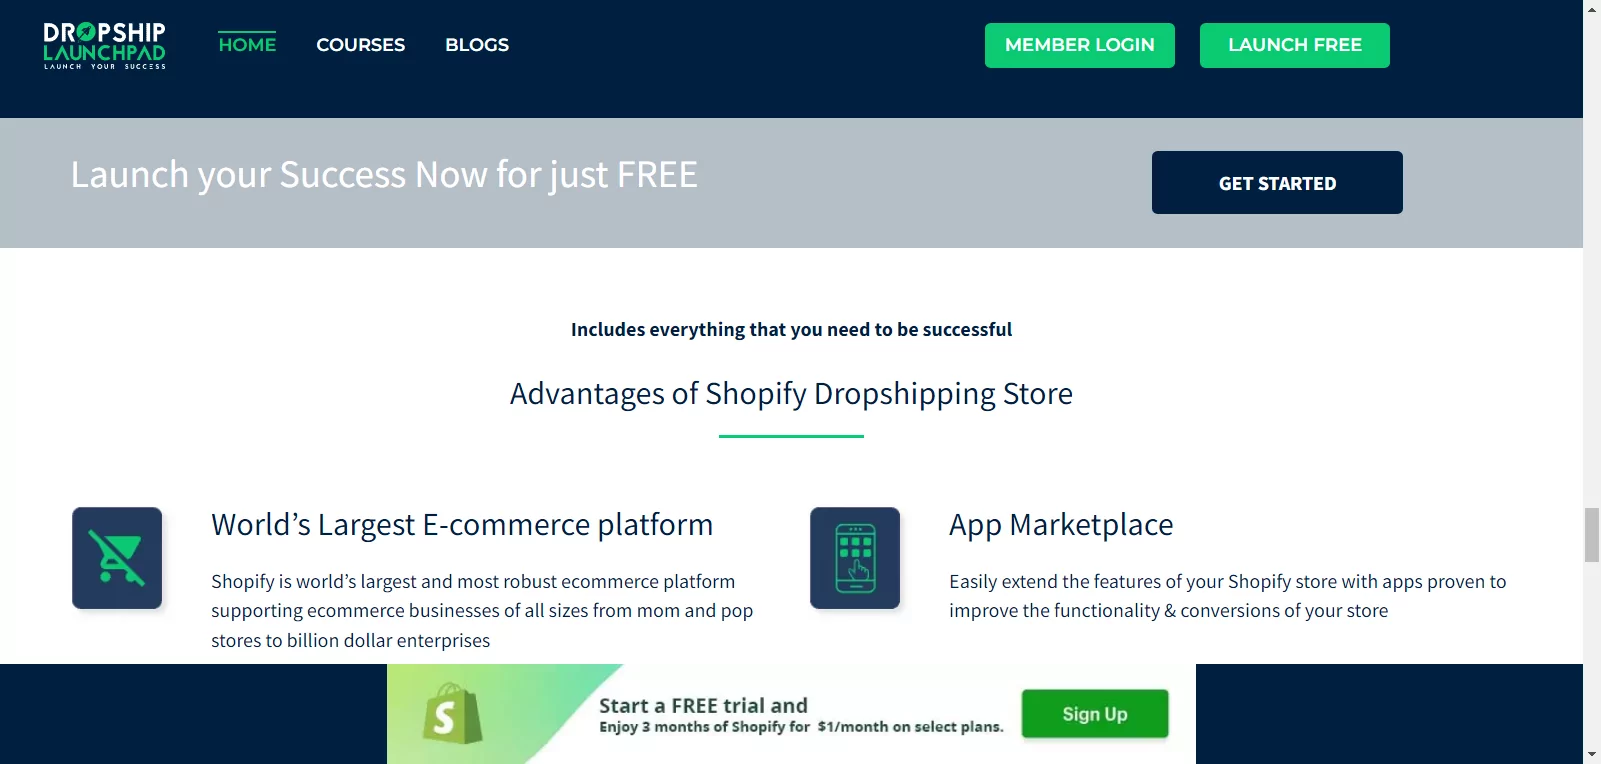 Why Choose Dropship Launchpad for Your Baby Store?